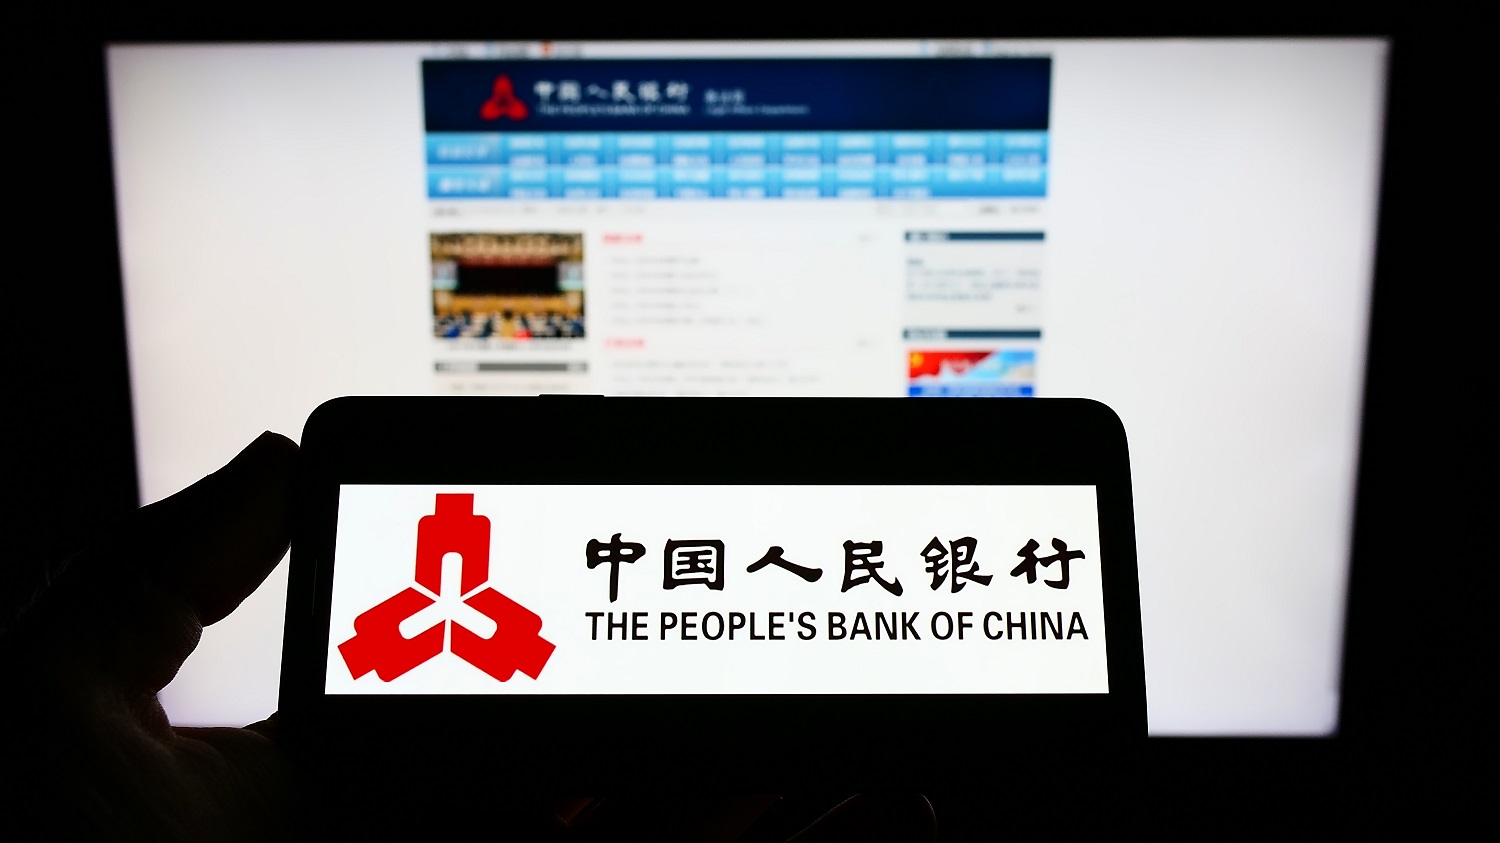 A person holds a cellphone with the logo of the People’s Bank of China on its screen in front of a PC displaying the bank’s webpage.